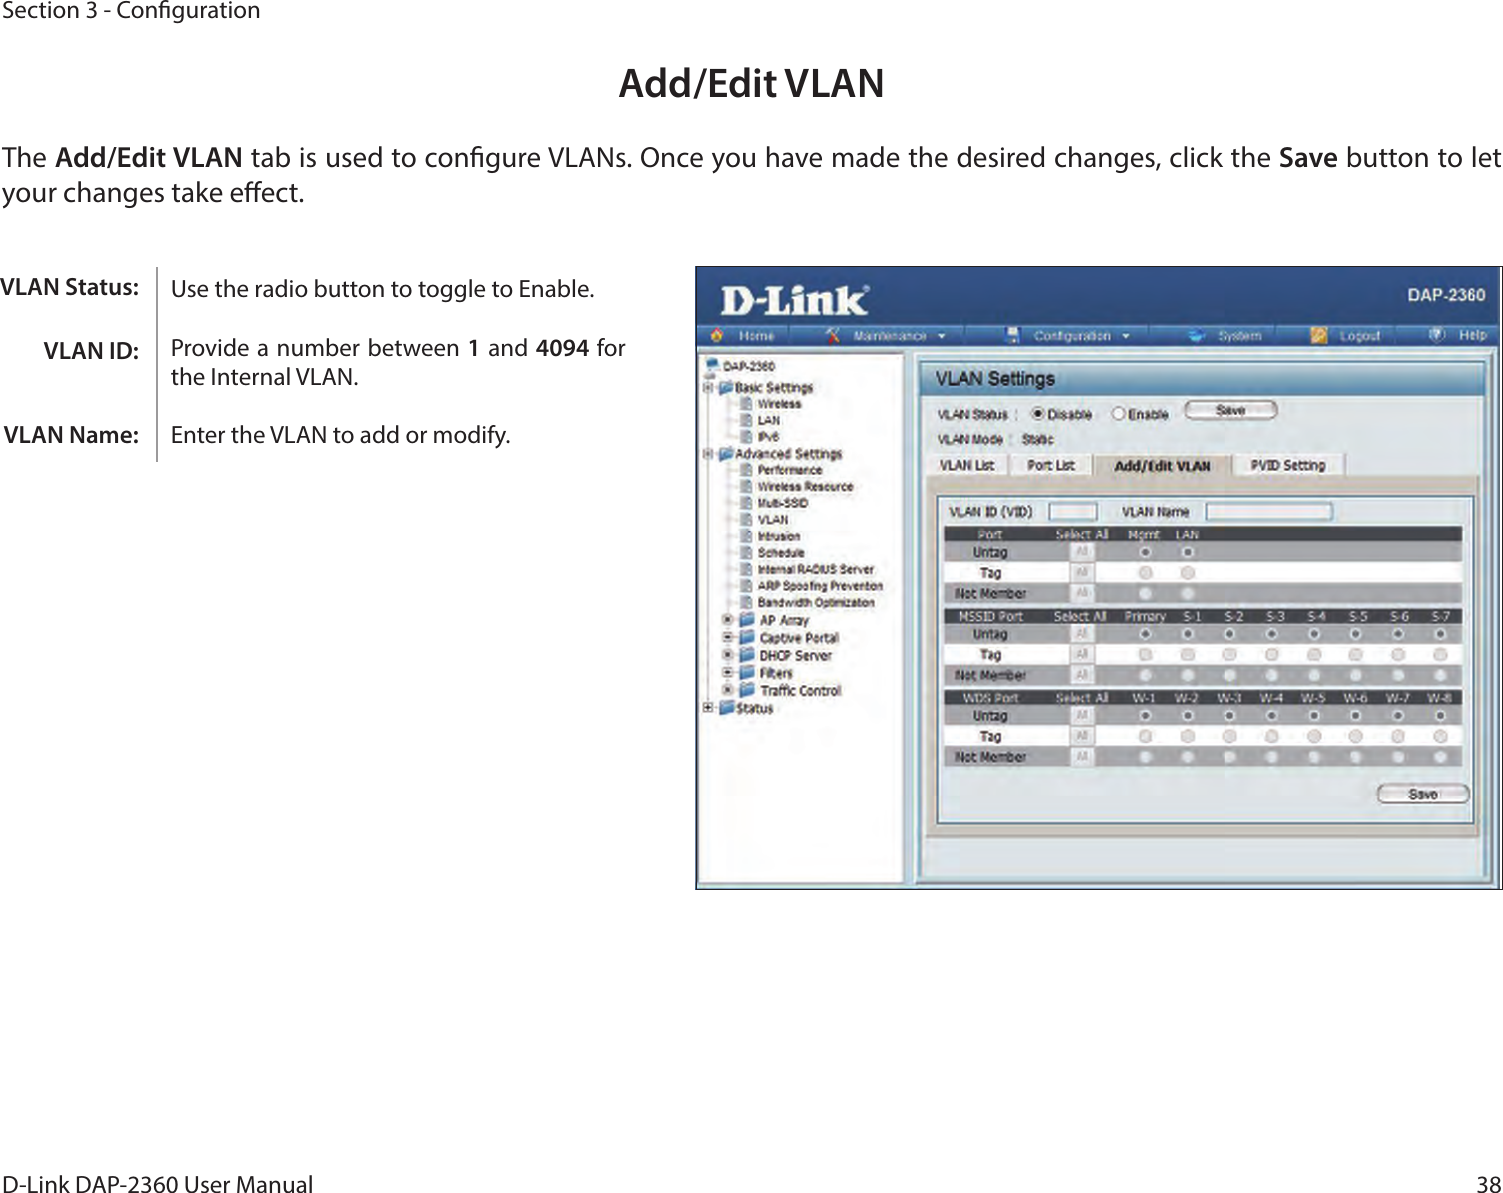 38D-Link DAP-2360 User ManualSection 3 - CongurationAdd/Edit VLANThe Add/Edit VLAN tab is used to congure VLANs. Once you have made the desired changes, click the Save button to let your changes take eect.Use the radio button to toggle to Enable. Provide a number between 1 and 4094 for the Internal VLAN.Enter the VLAN to add or modify.VLAN Status:VLAN ID:VLAN Name: